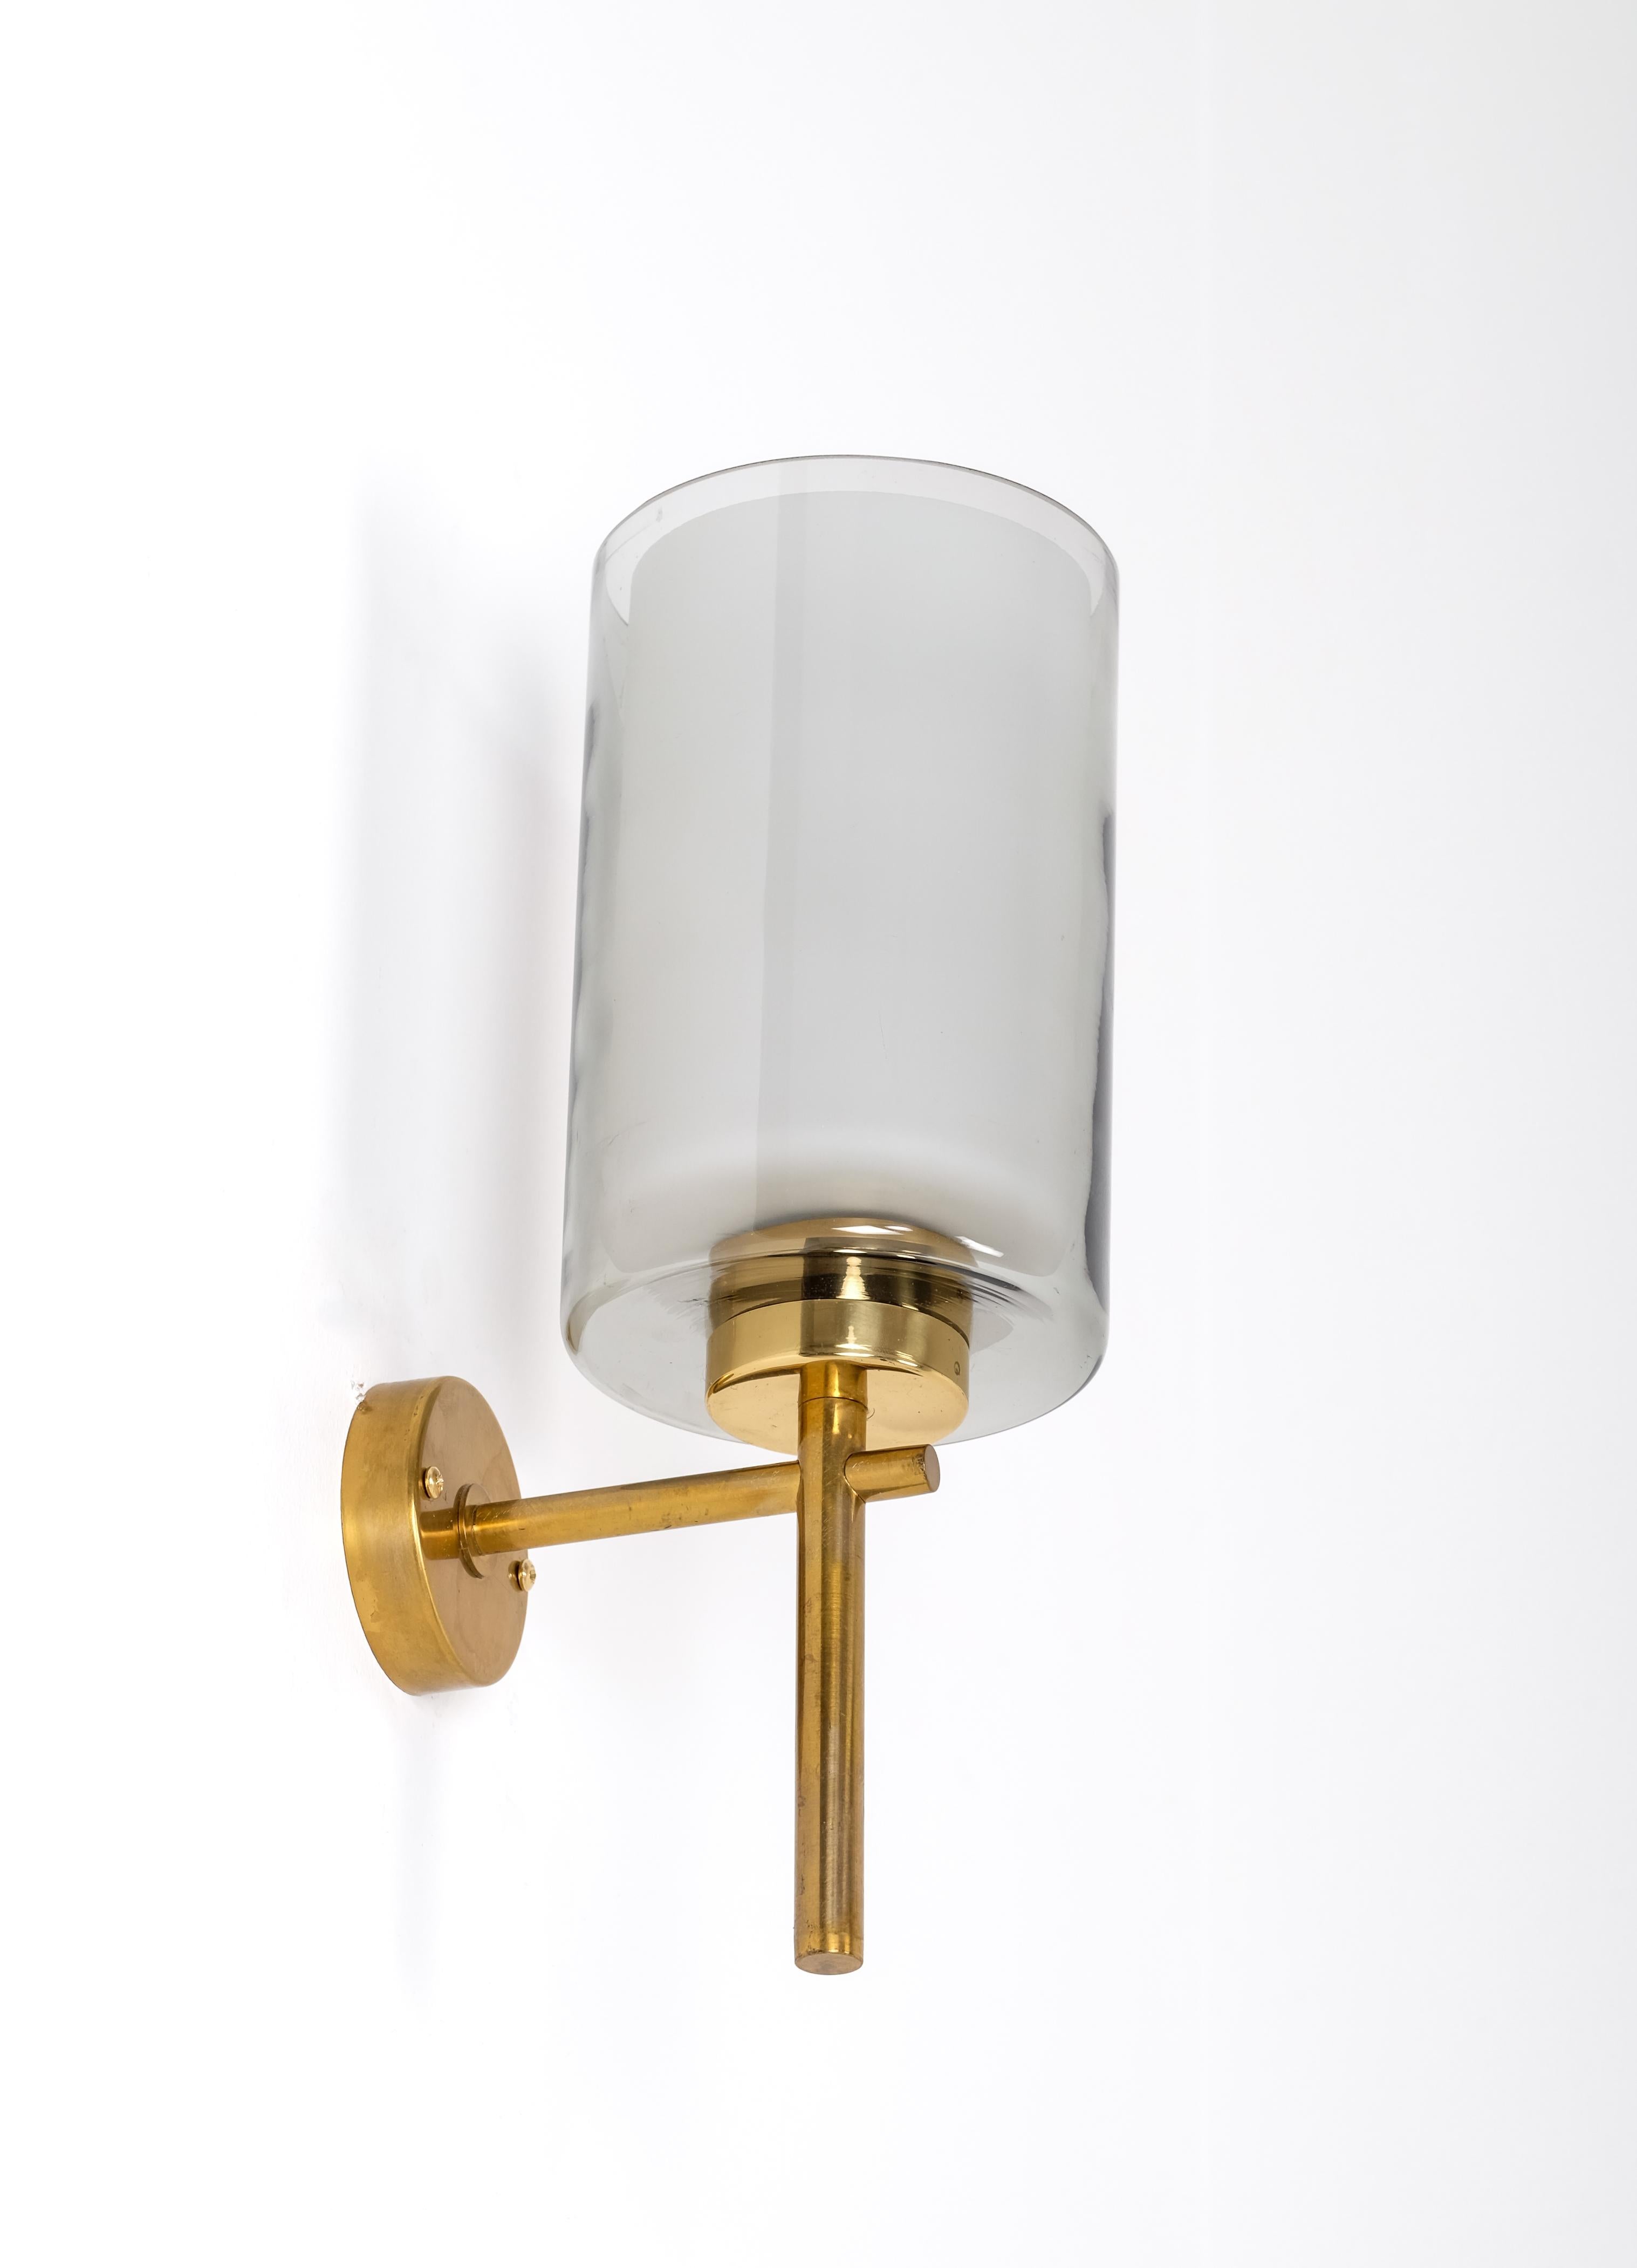 Set of 6 Brass & Glass wall lamps, Sweden, 1950s For Sale 1